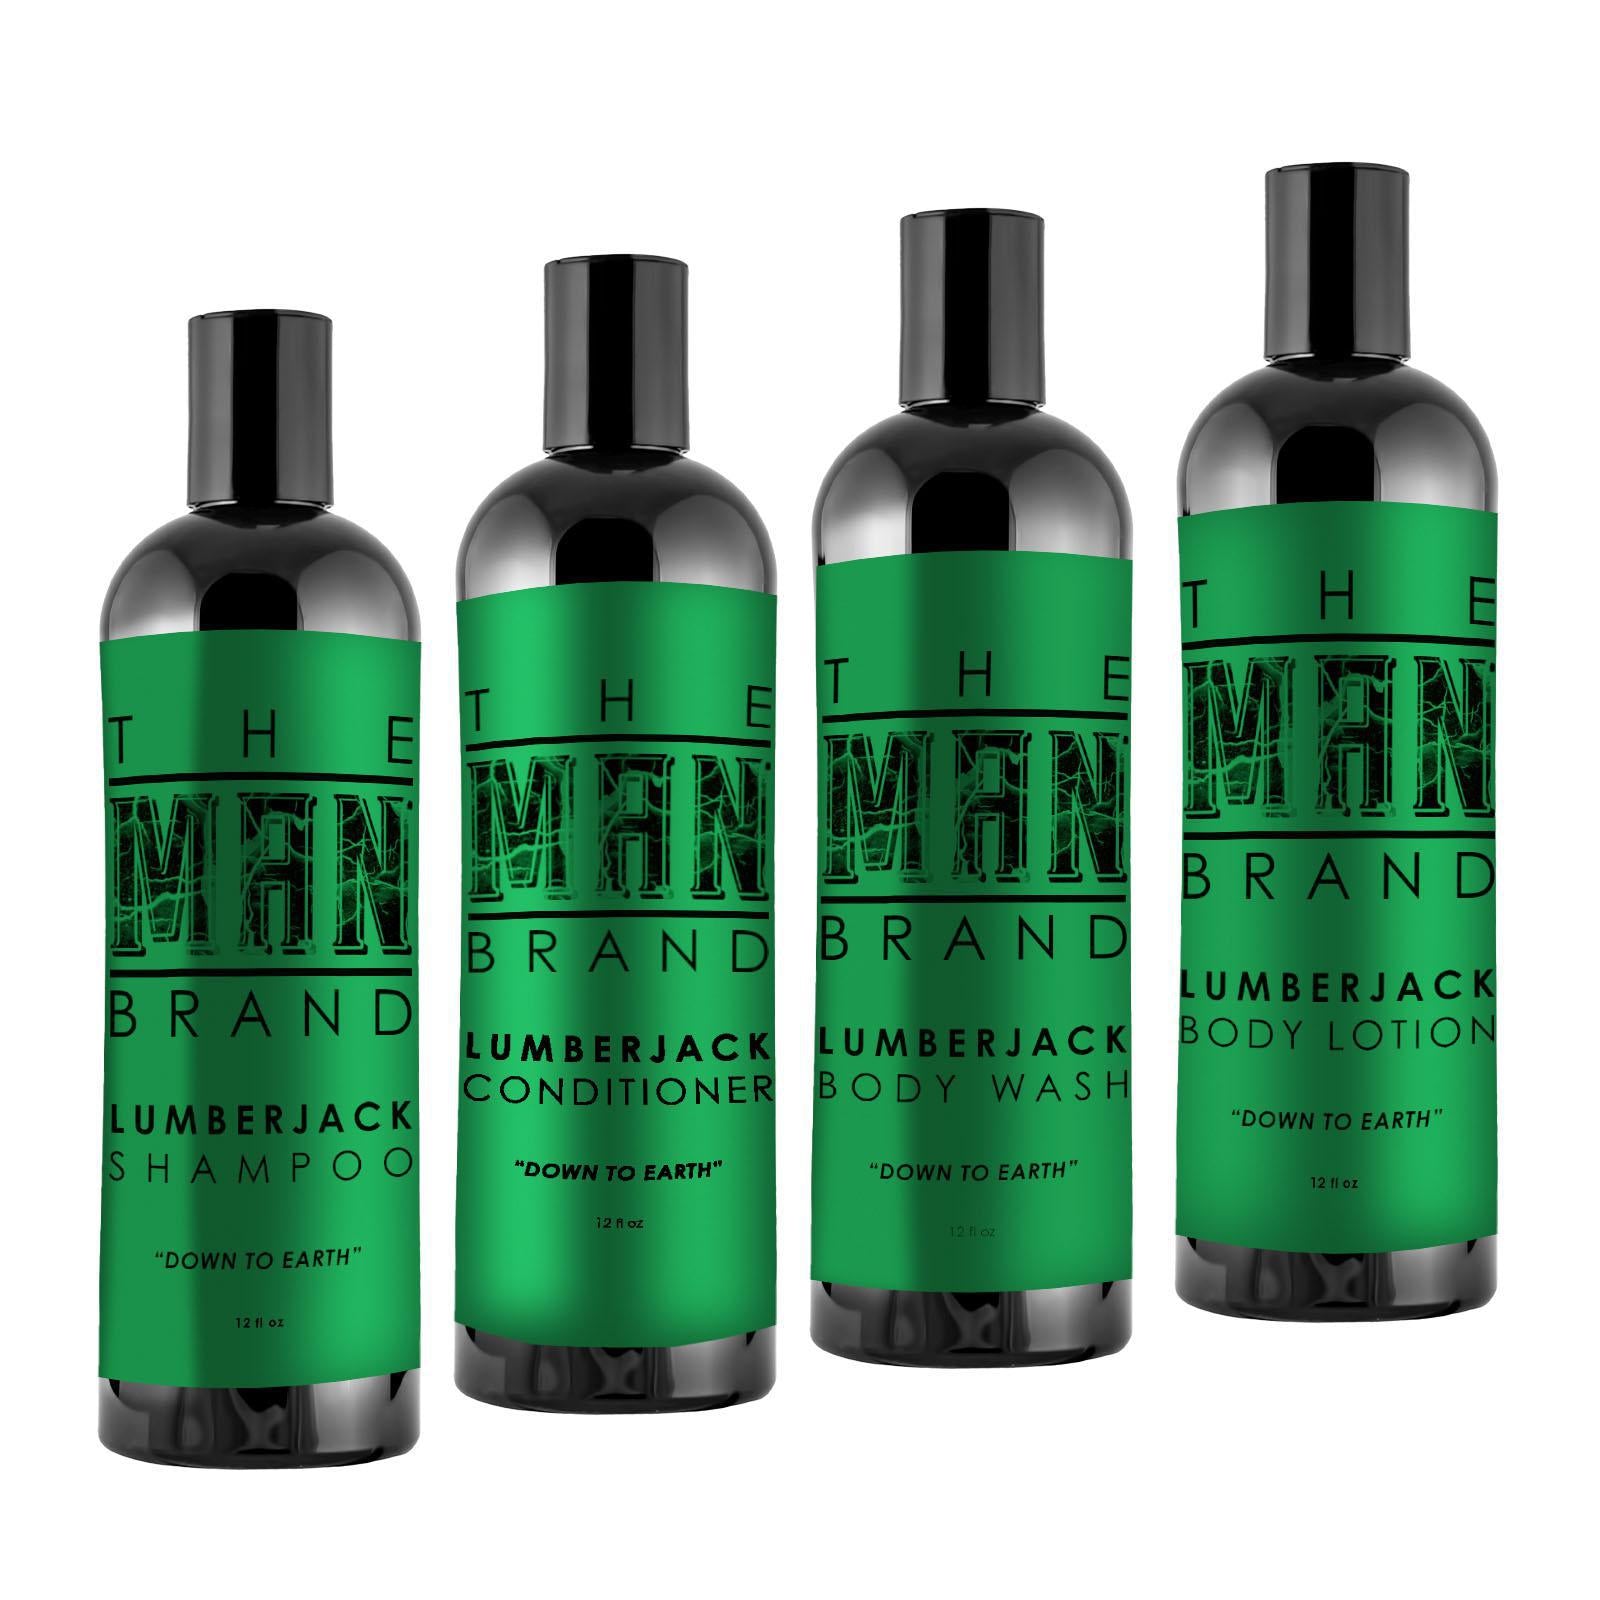 Get Clean Men's Grooming Kit: Shampoo, Conditioner, Body Wash, and Body Lotion